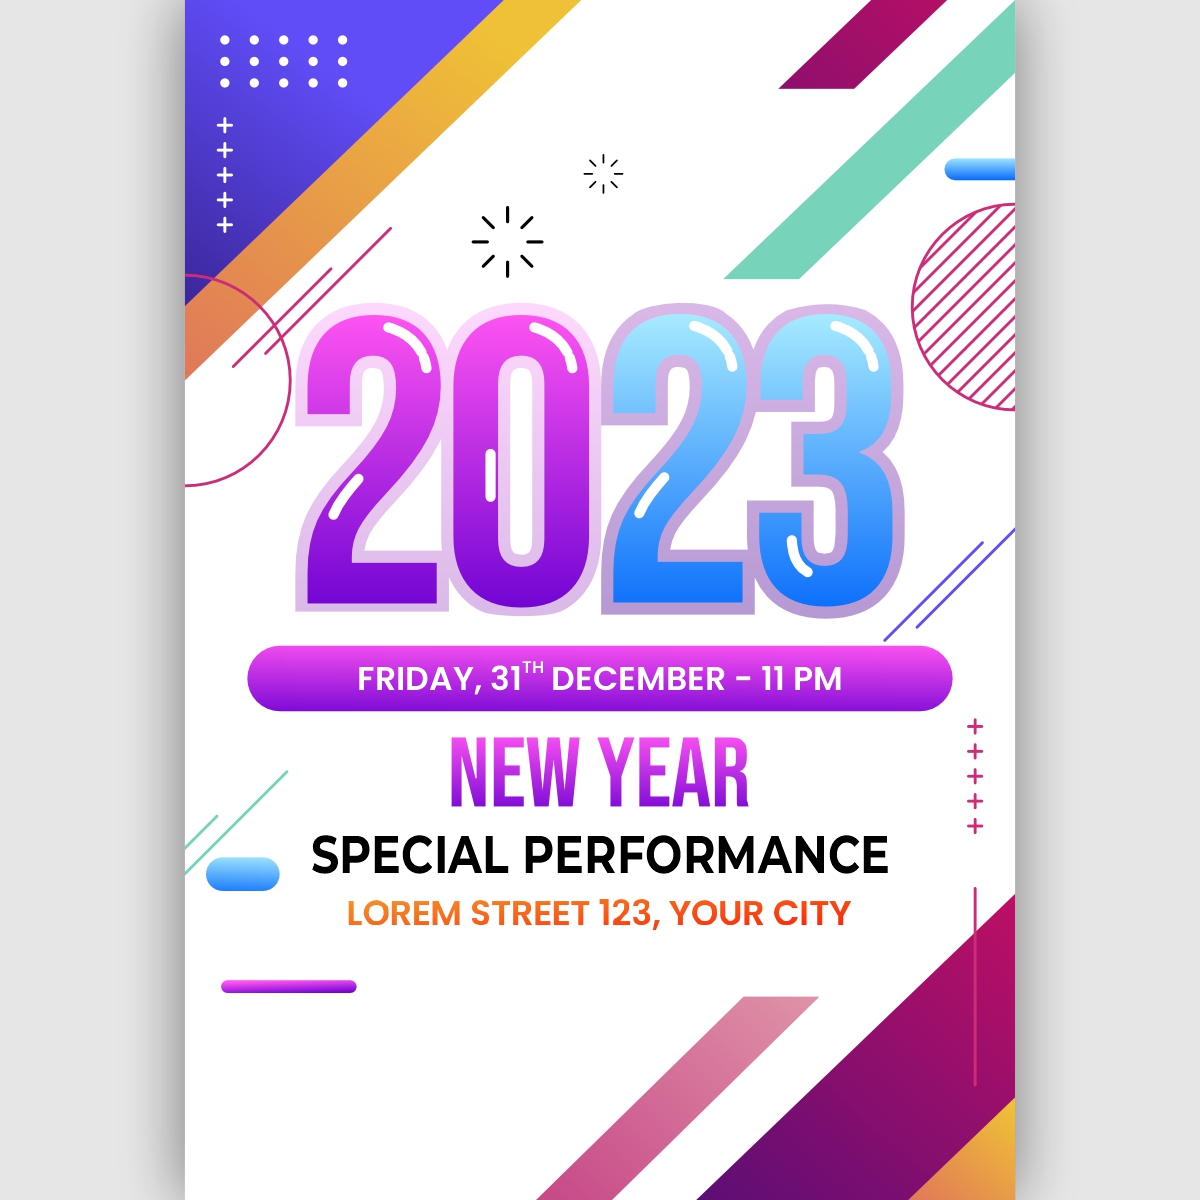 Event Flyer Download Free From CorelDraw Design New Year